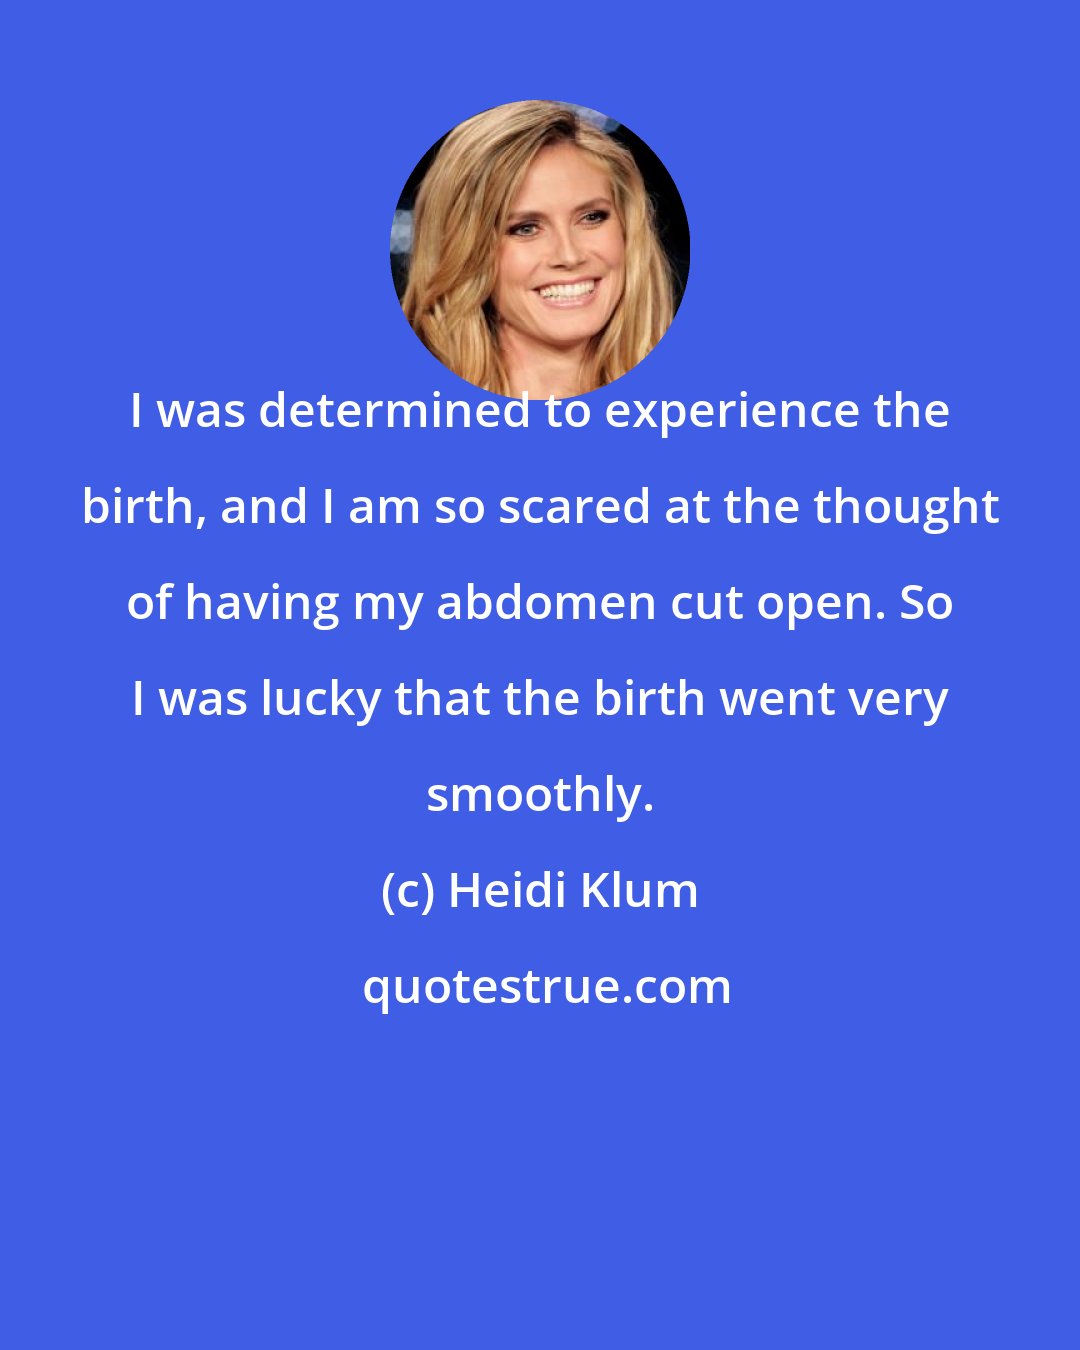 Heidi Klum: I was determined to experience the birth, and I am so scared at the thought of having my abdomen cut open. So I was lucky that the birth went very smoothly.